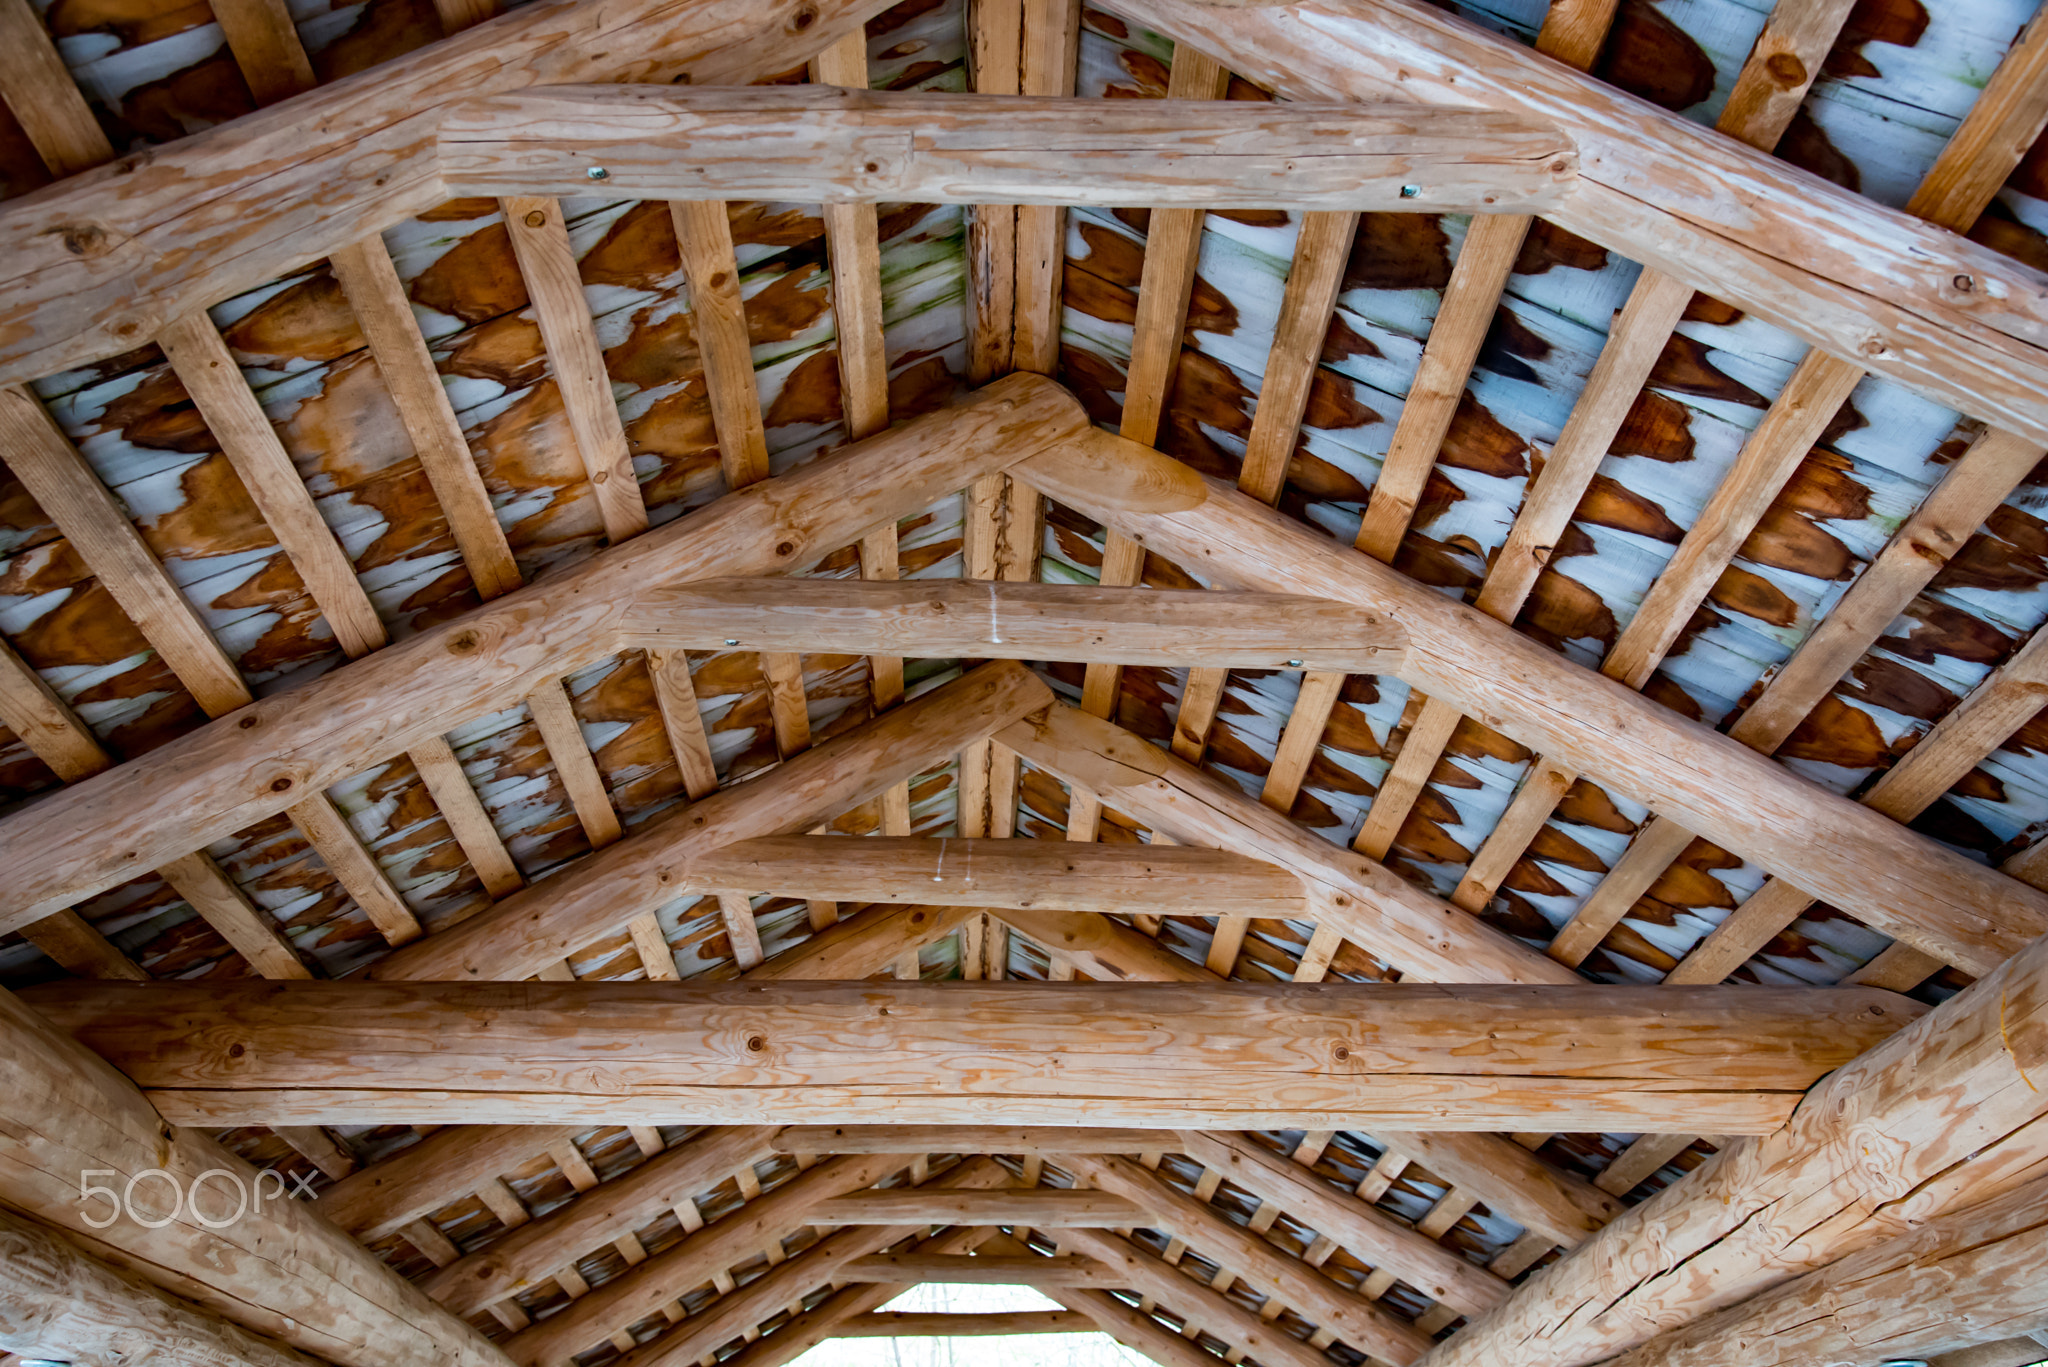 Amazing Roofing wooden construction in Germany